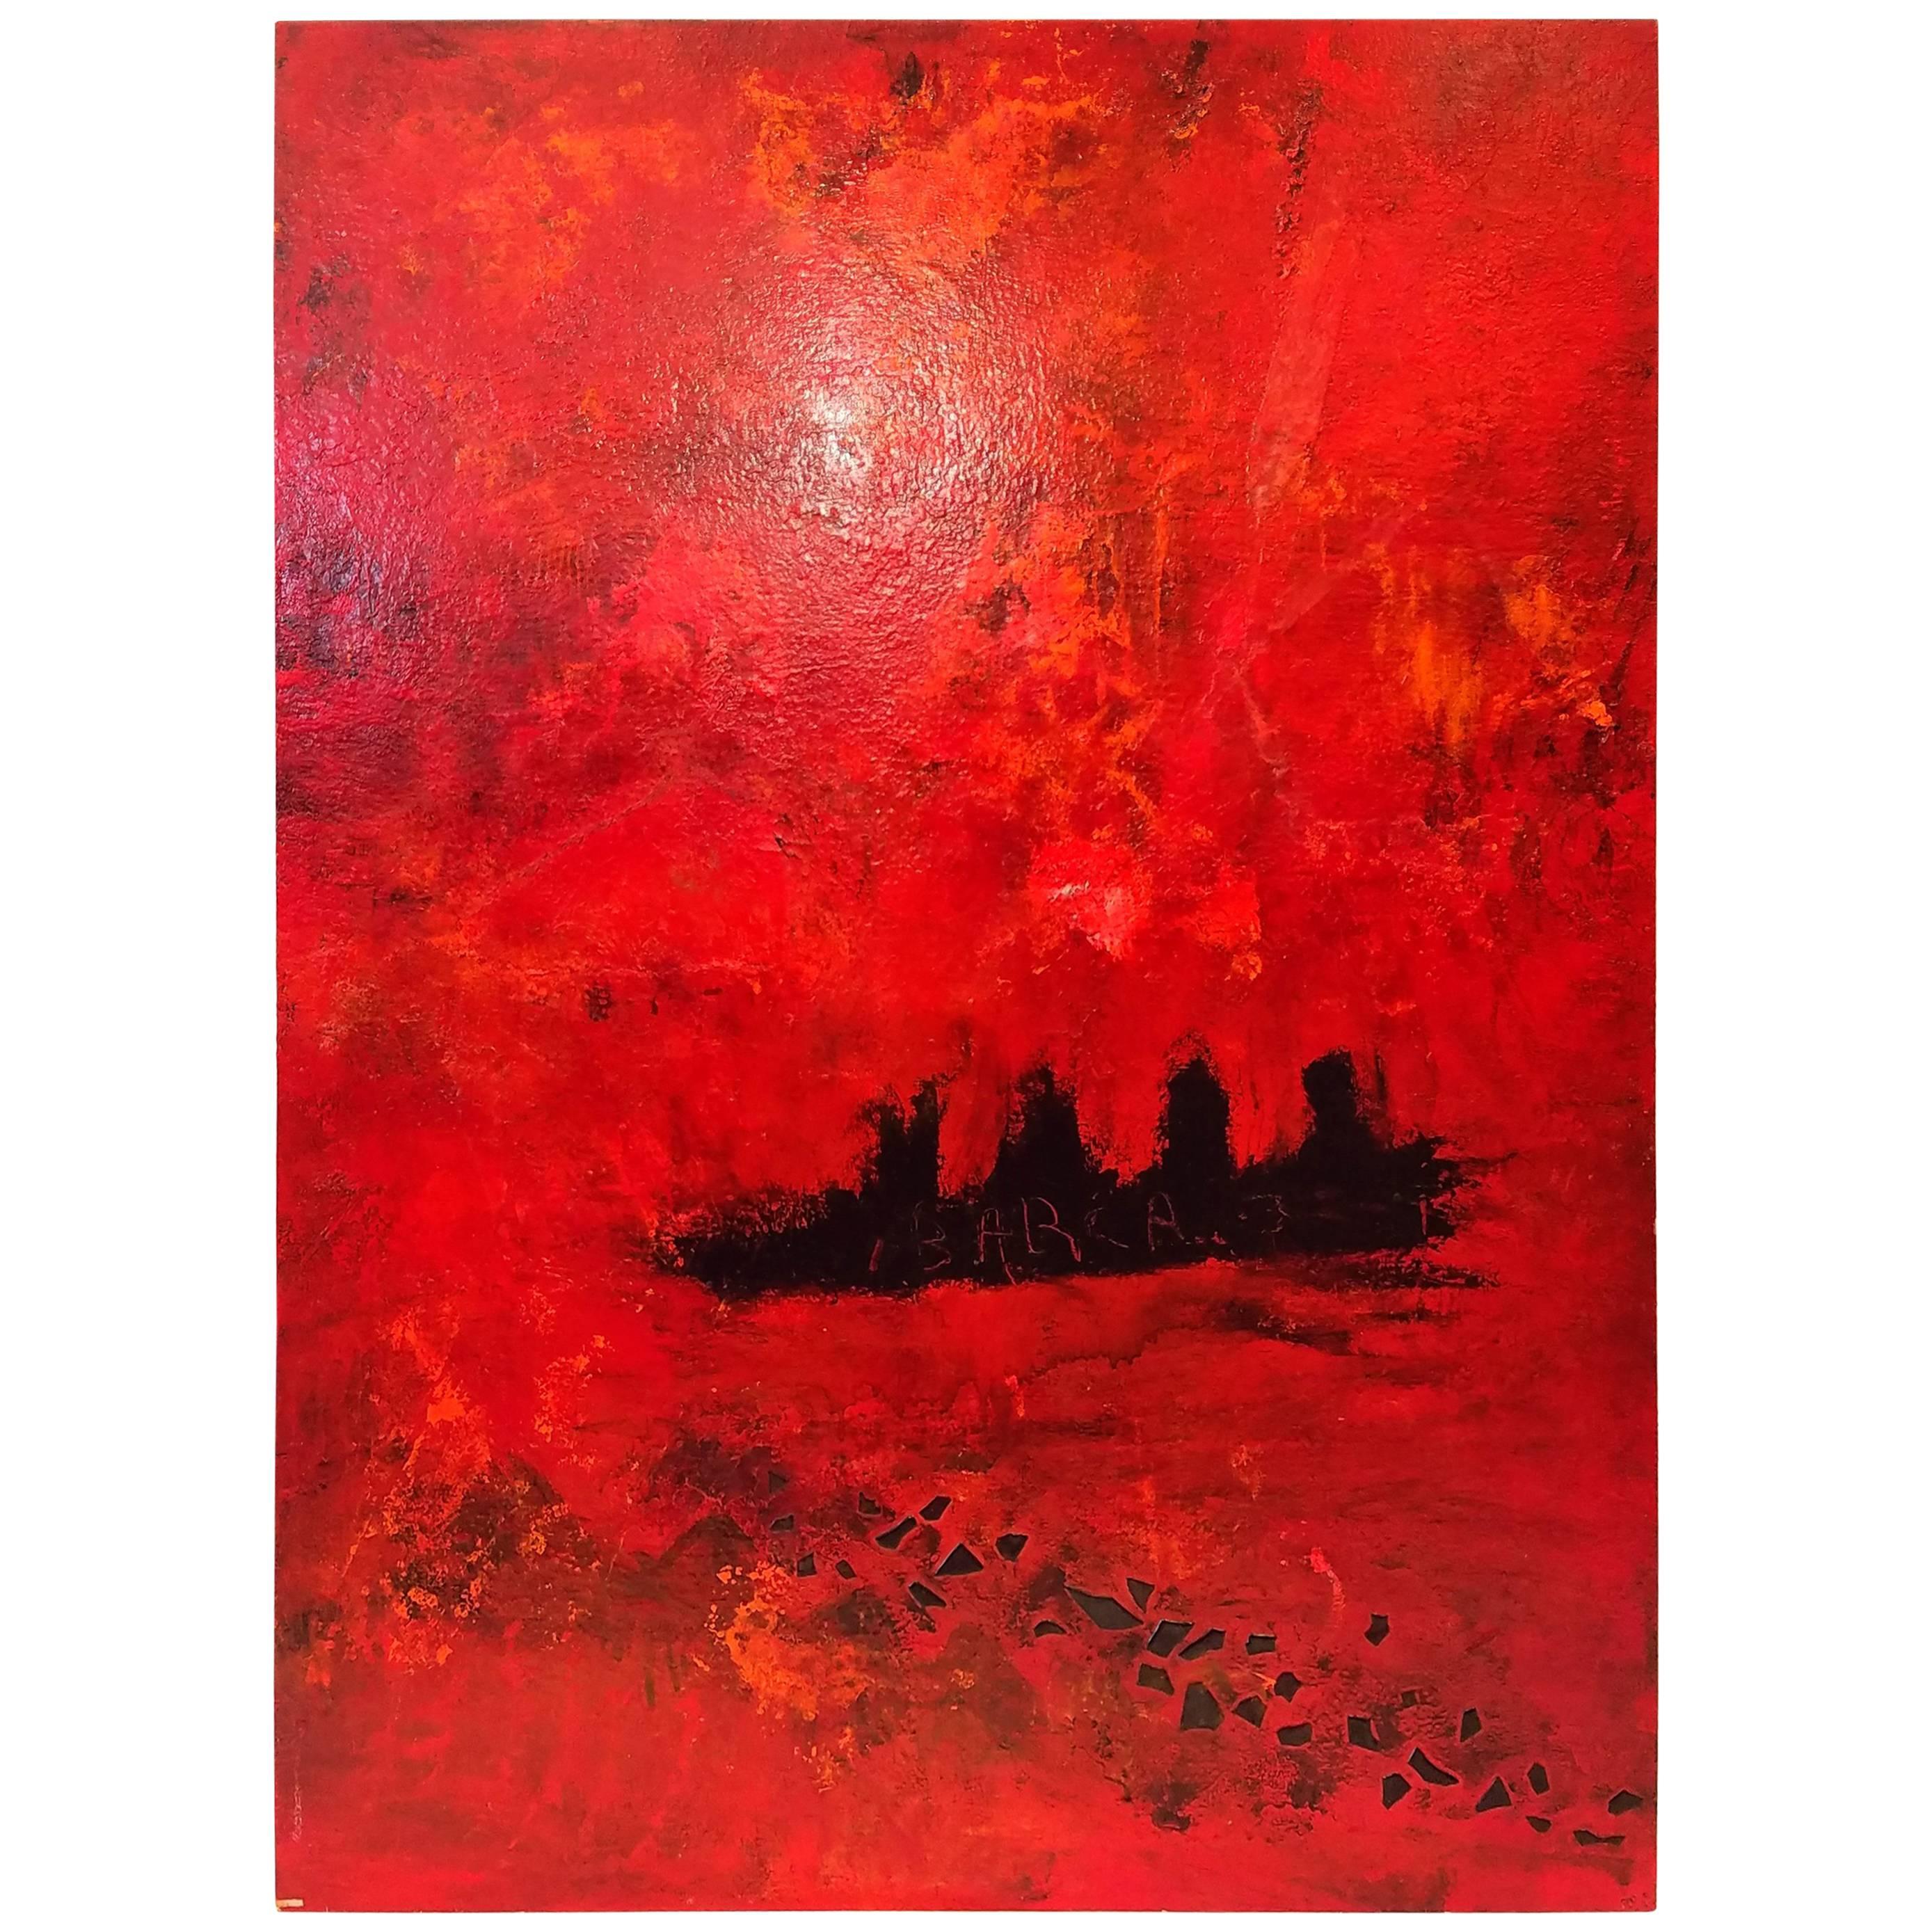 Adam Shaw "Barca" Mixed-Medium Abstract, Signed For Sale